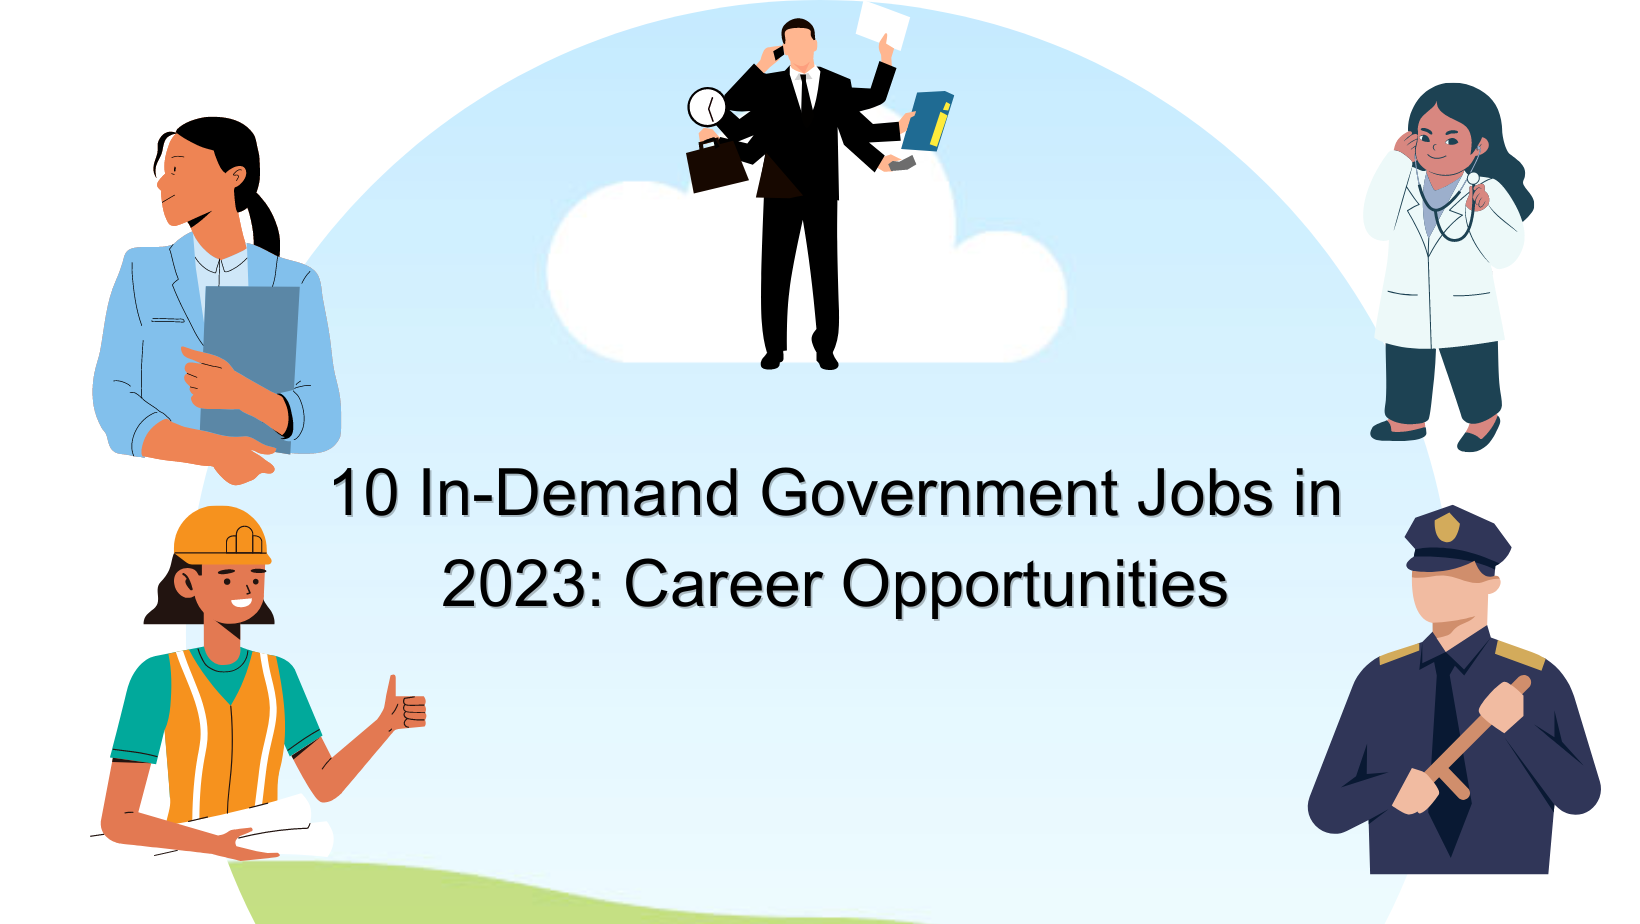 Government Jobs in 2023